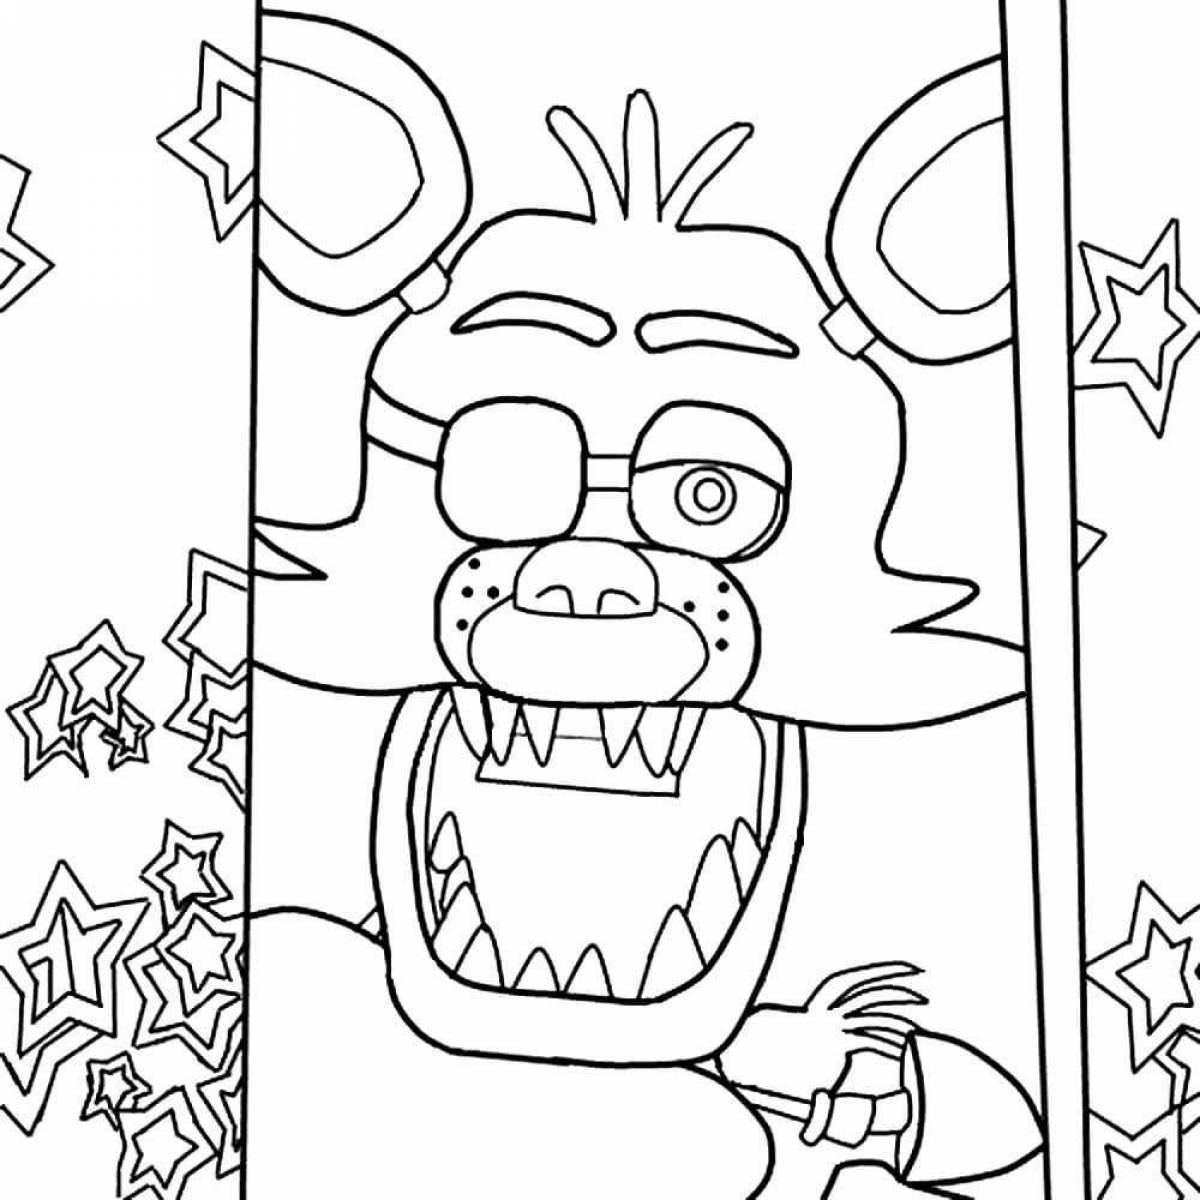 Awesome foxy animatronic coloring book